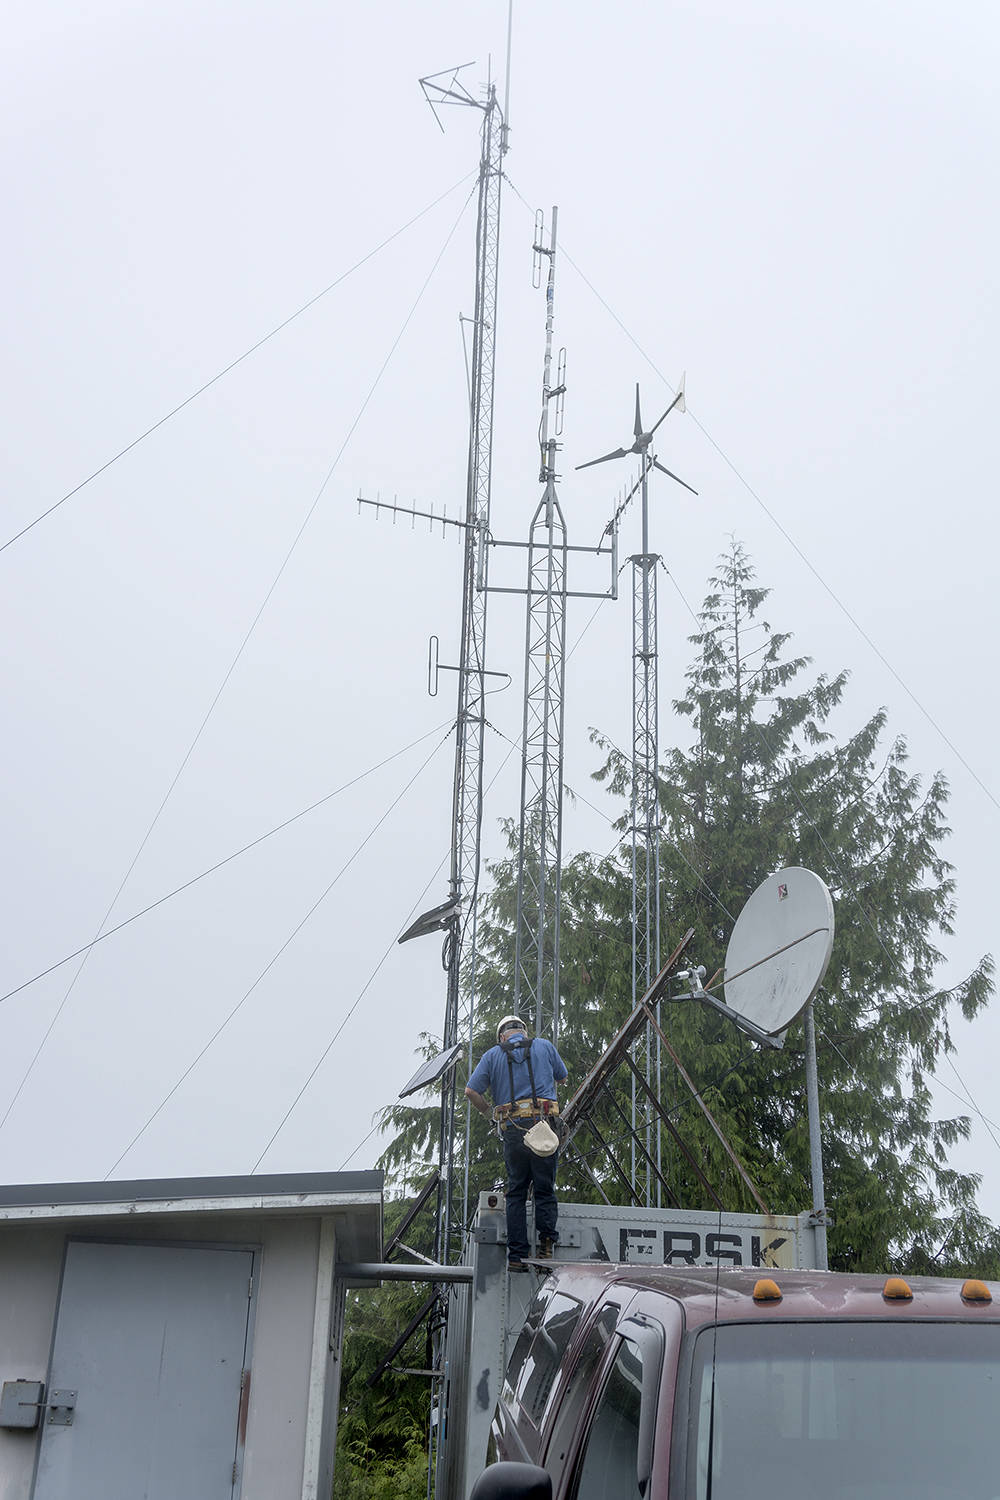 Clallam County Amateur Radio Club member Chuck Stroeher recently worked in preparation for installing three new antennas for the amateur radio repeater that will be moving to this site. Chuck was accompanied by three other members of the club who worked as the ground crew and support while Chuck was up in the air. Forks Community Hospital is the leaseholder of the site and is adding the Clallam County Amateur Radio Emergency Service as part of their emergency preparedness program. More information will be released when the installation is complete and operational. Photos Dave Youngberg